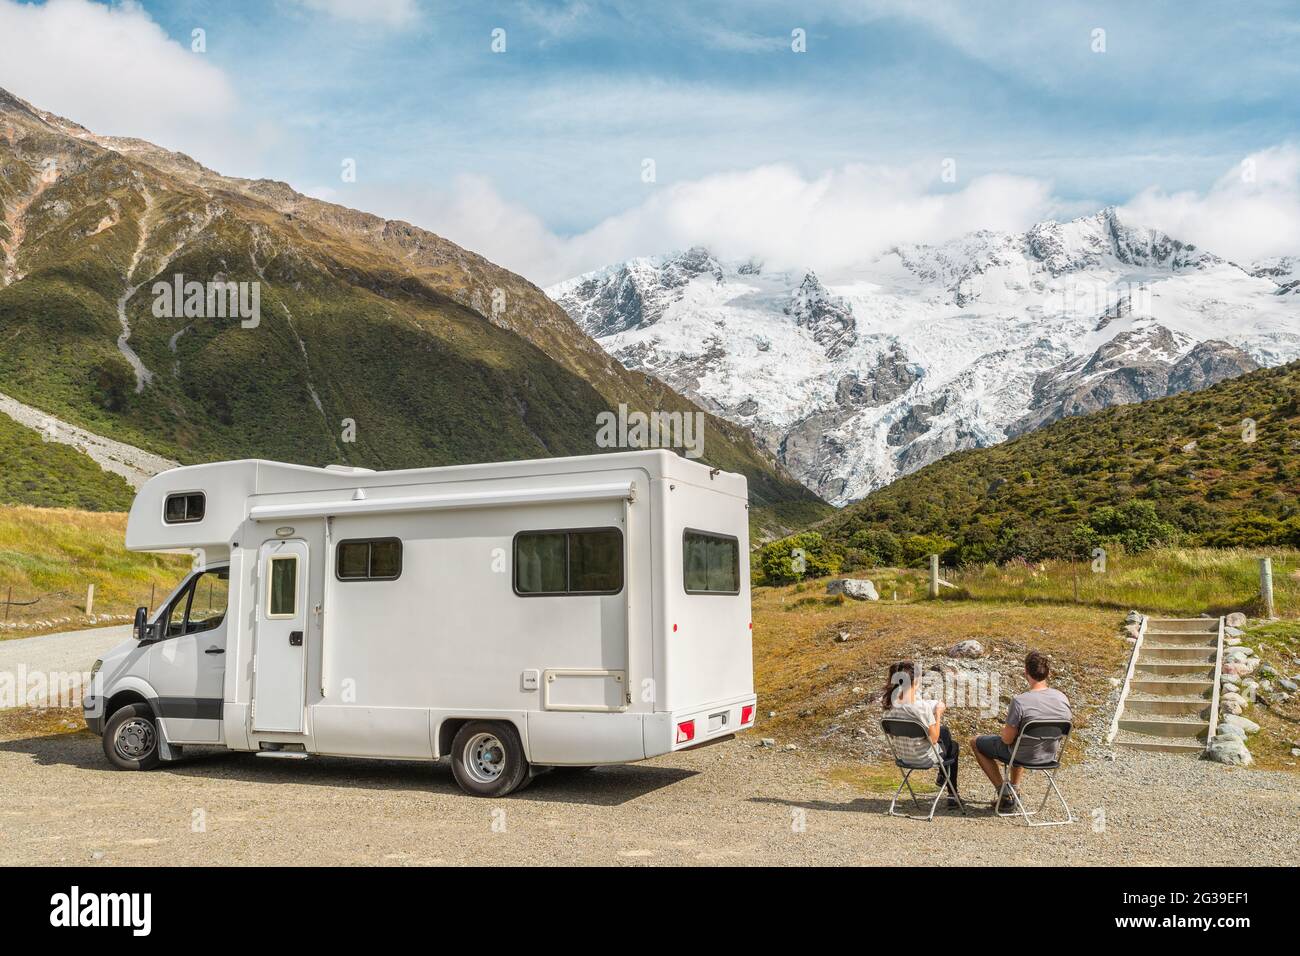 Motorhome camper van RV road trip on New Zealand. Couple on travel vacation adventure. Tourists looking at view of Aoraki Mount Cook National park and Stock Photo